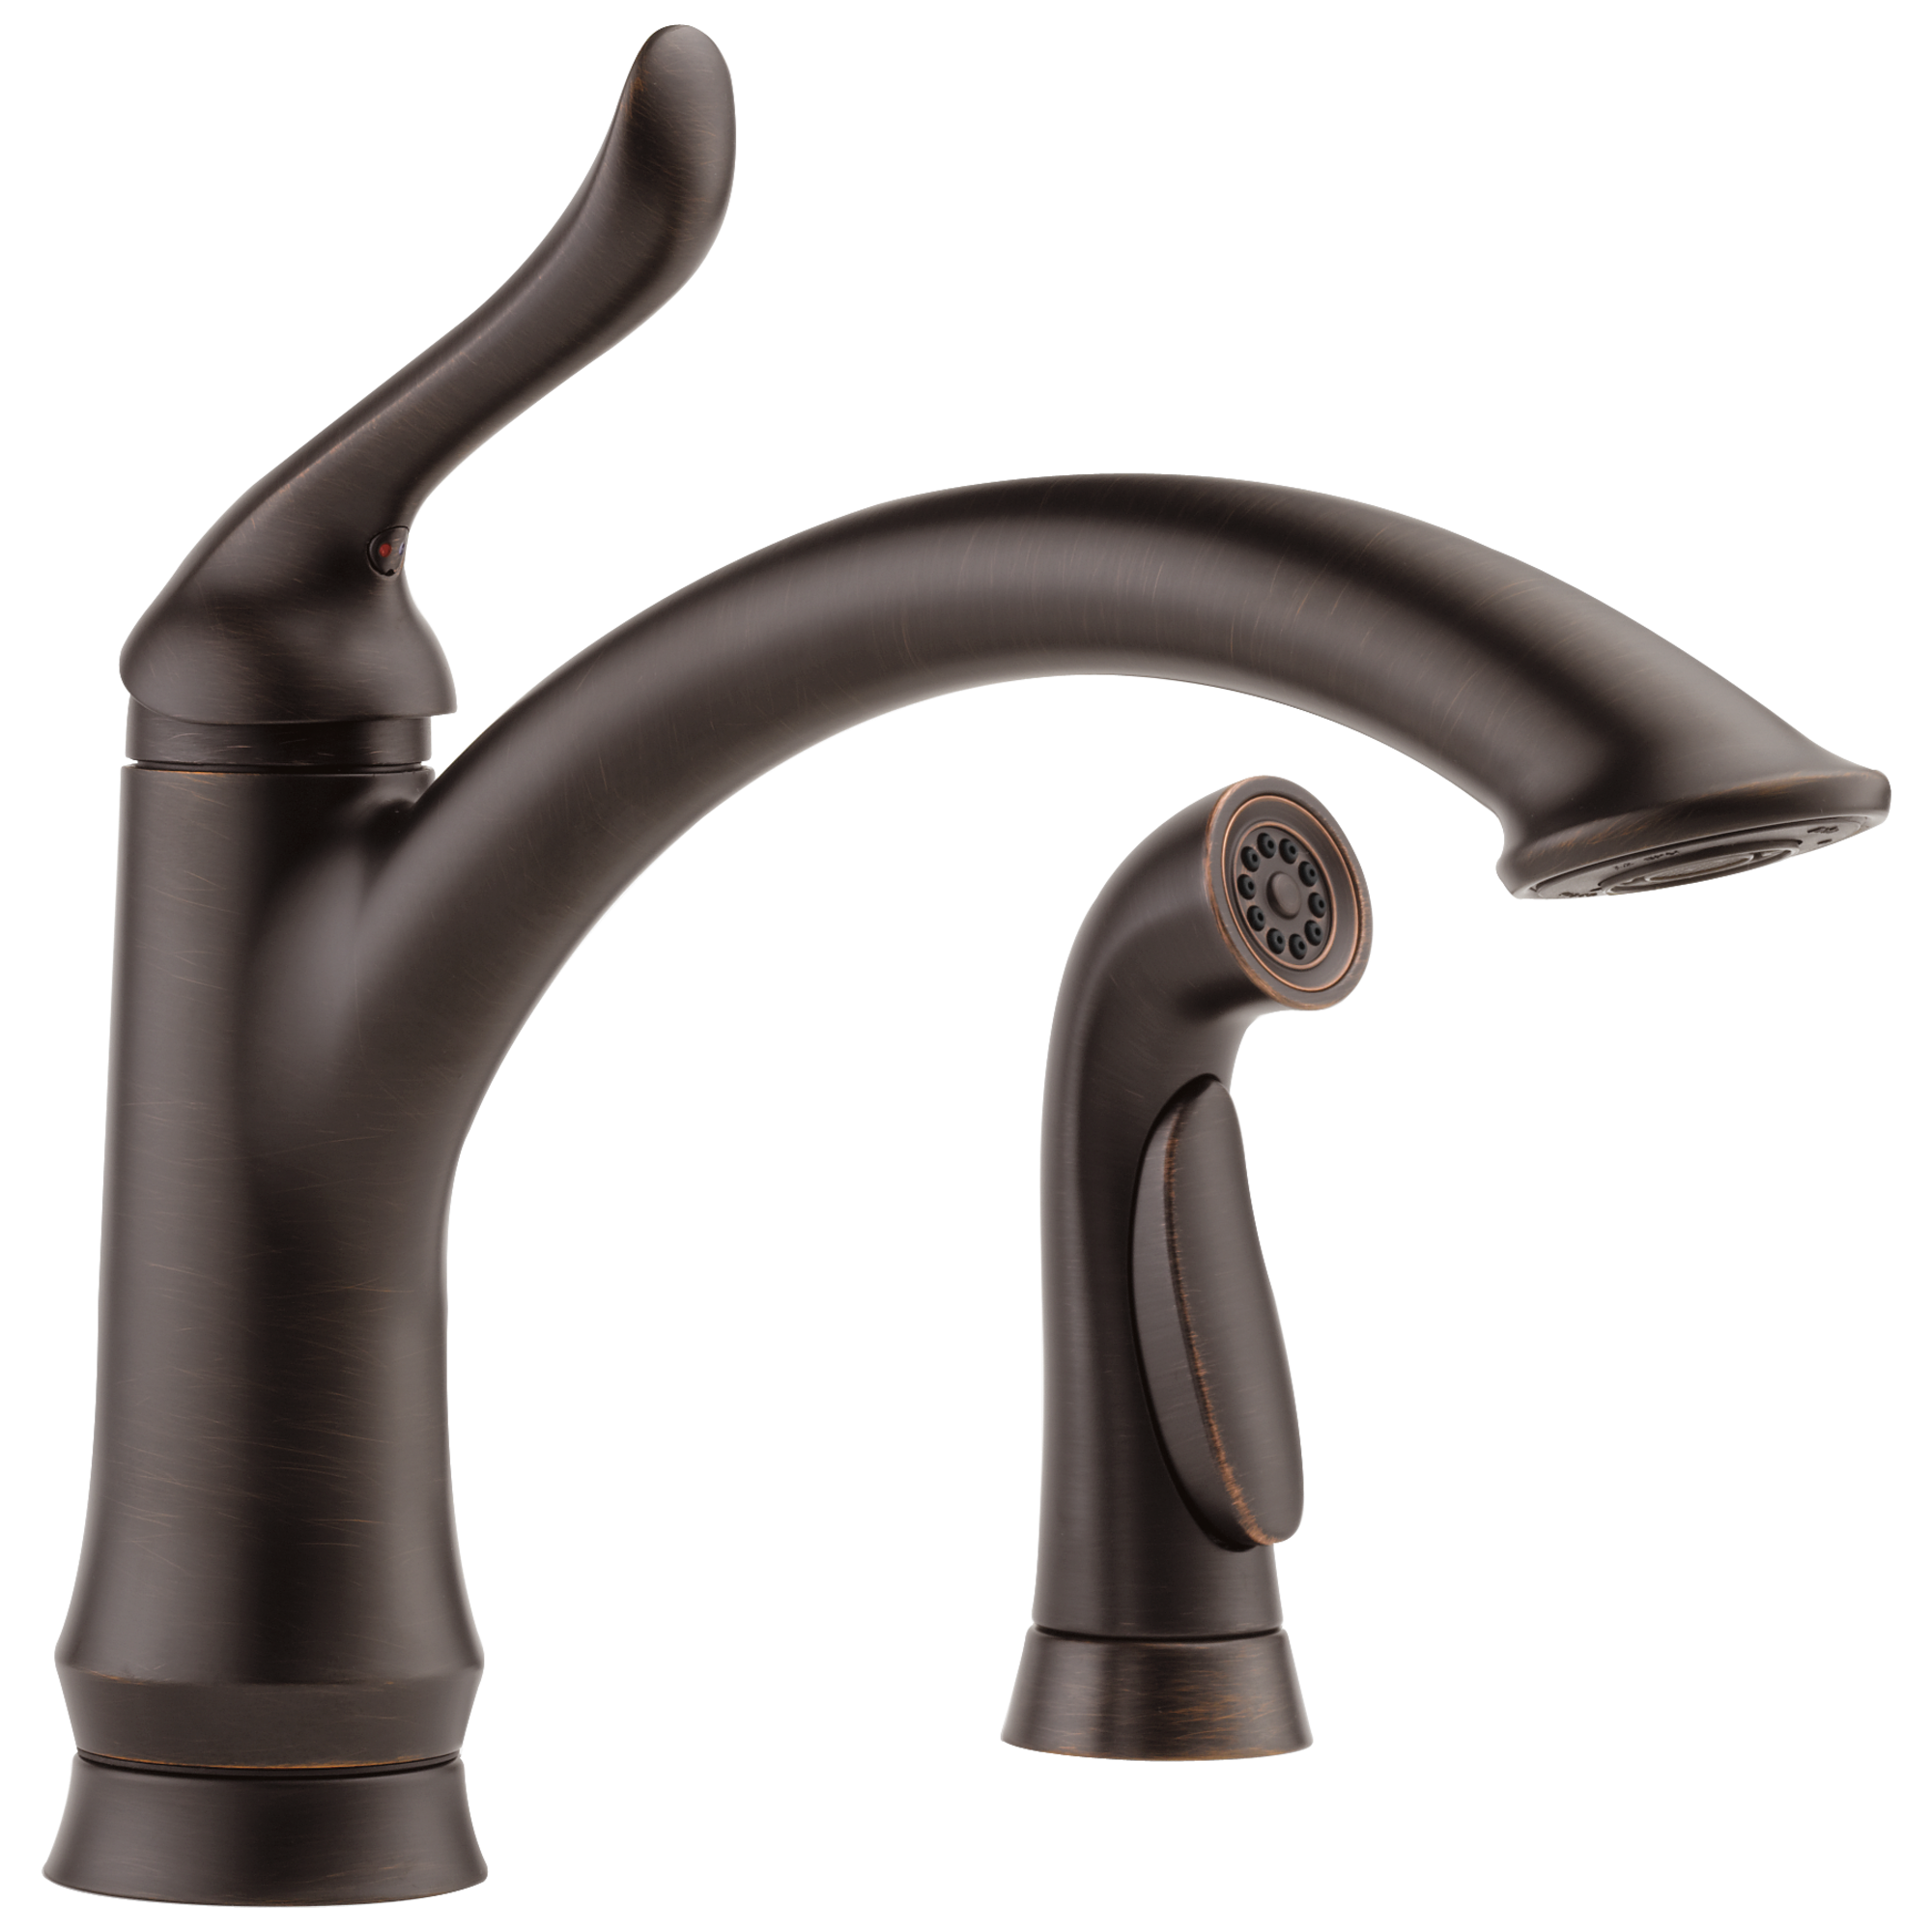 Delta 4453-DST Linden Single Handle Kitchen Faucet with Spray